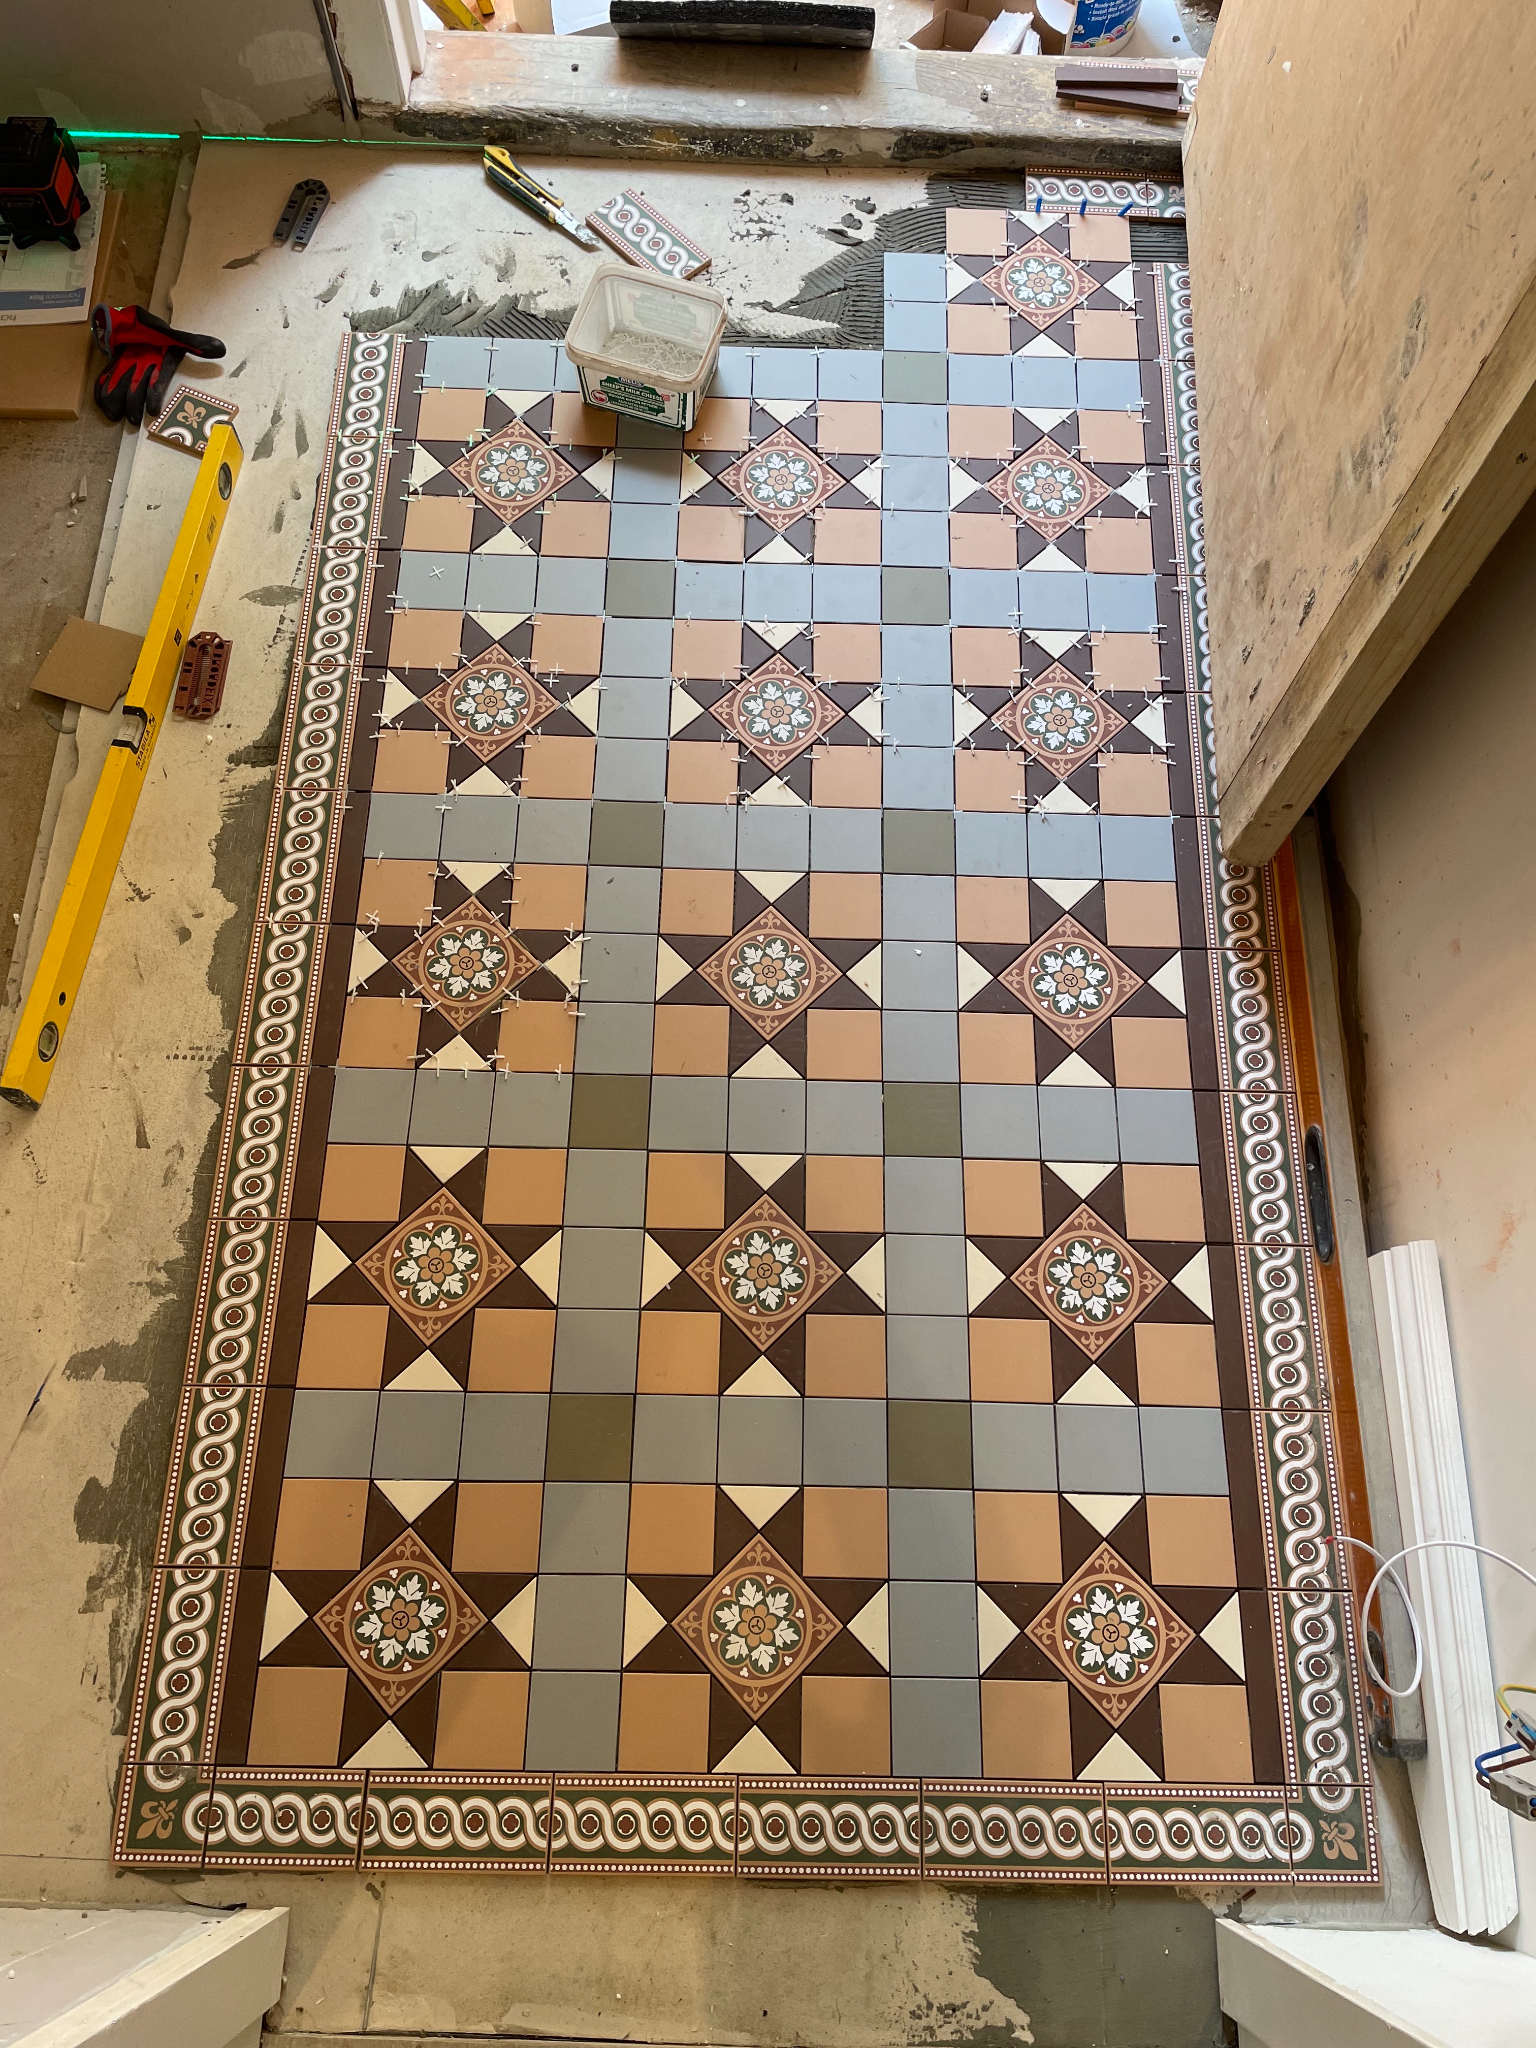 Tile installation in the entrance hall